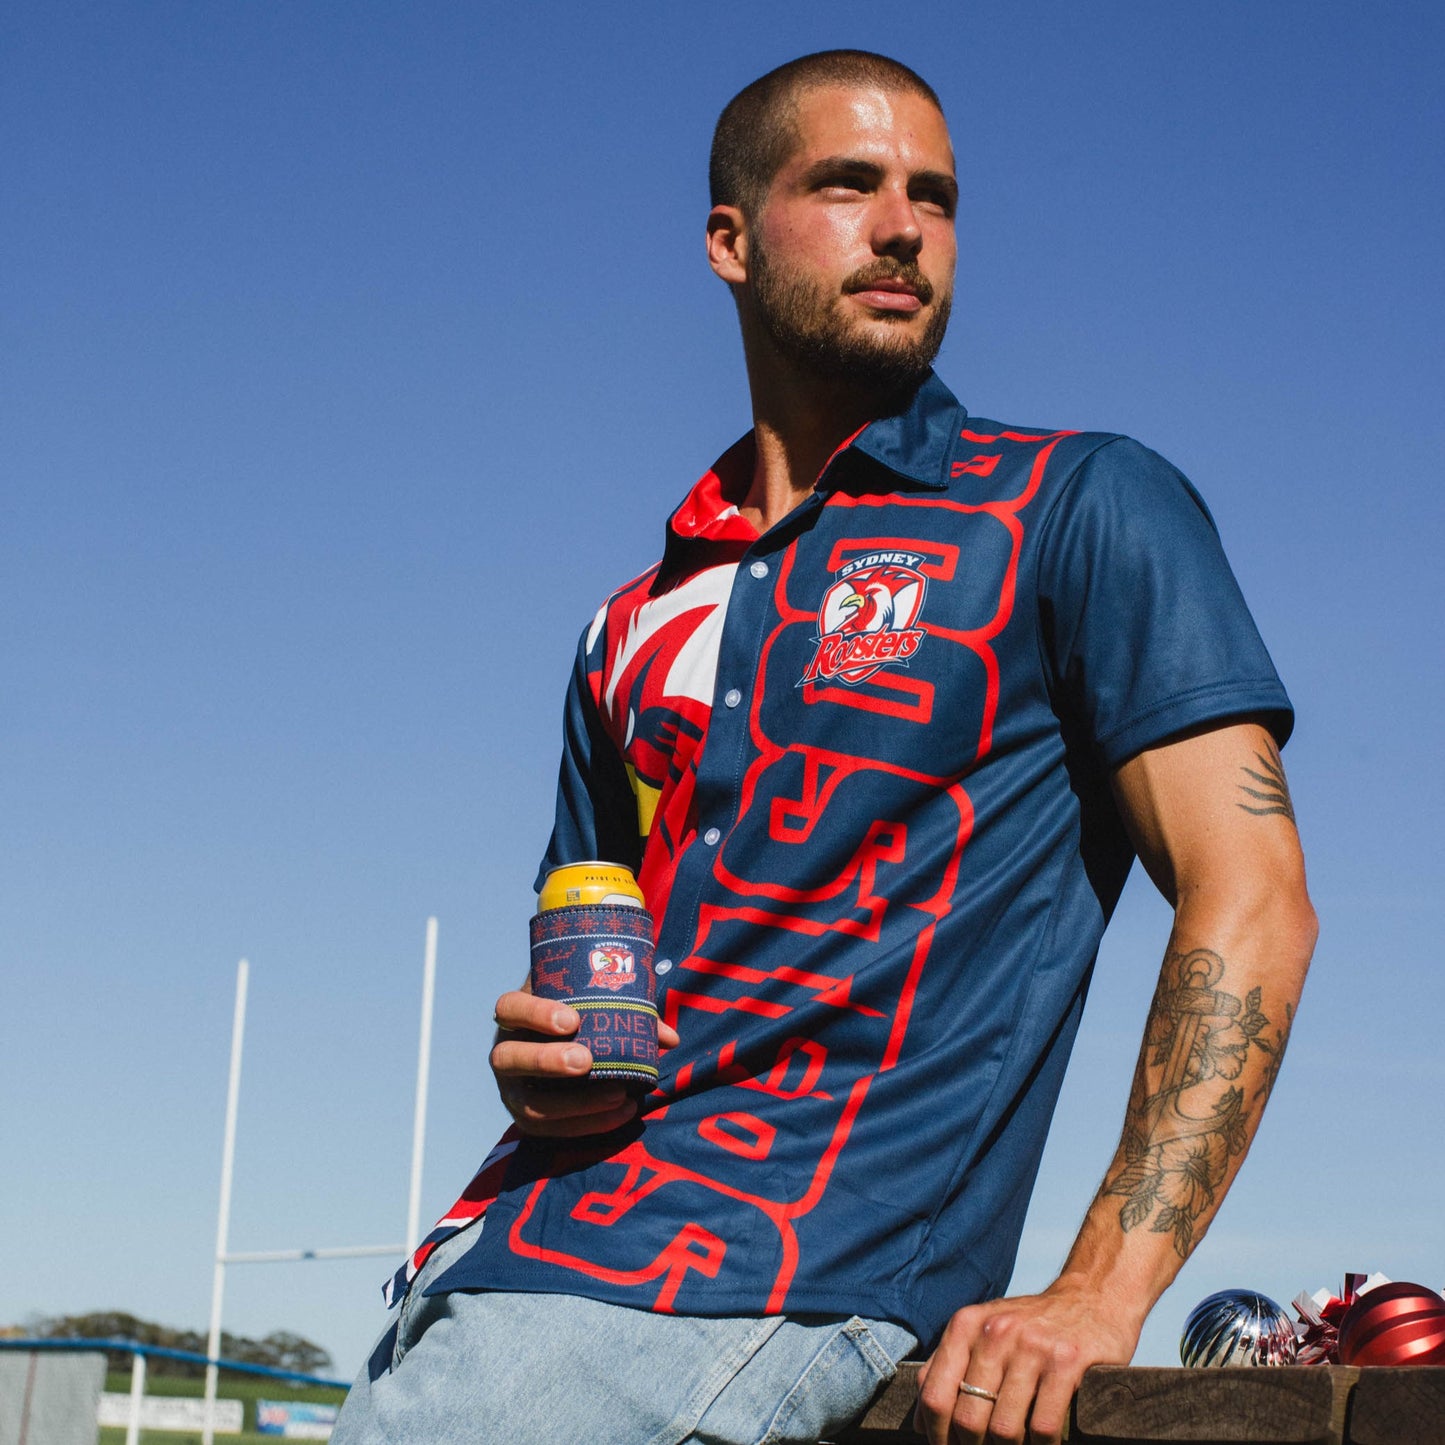 Sydney Roosters Mens 'Showtime' Party Shirt